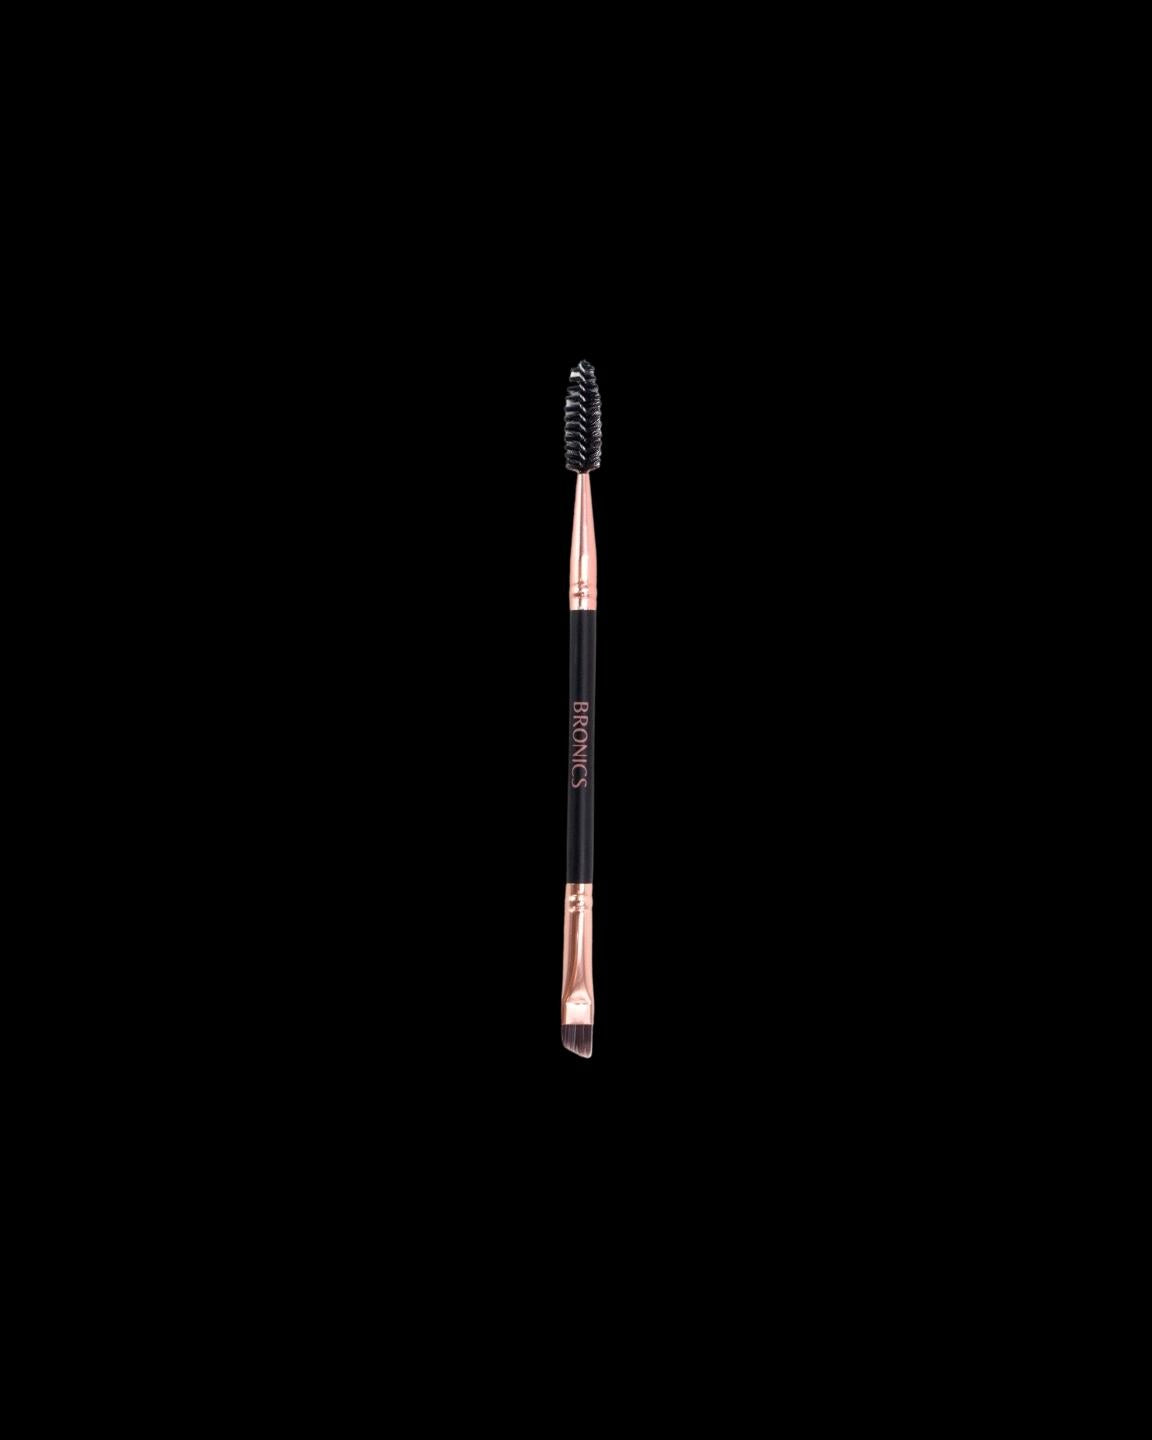 Bronics Eyebrow two sided brush with angled brush and spoolie brush in gold and black colour